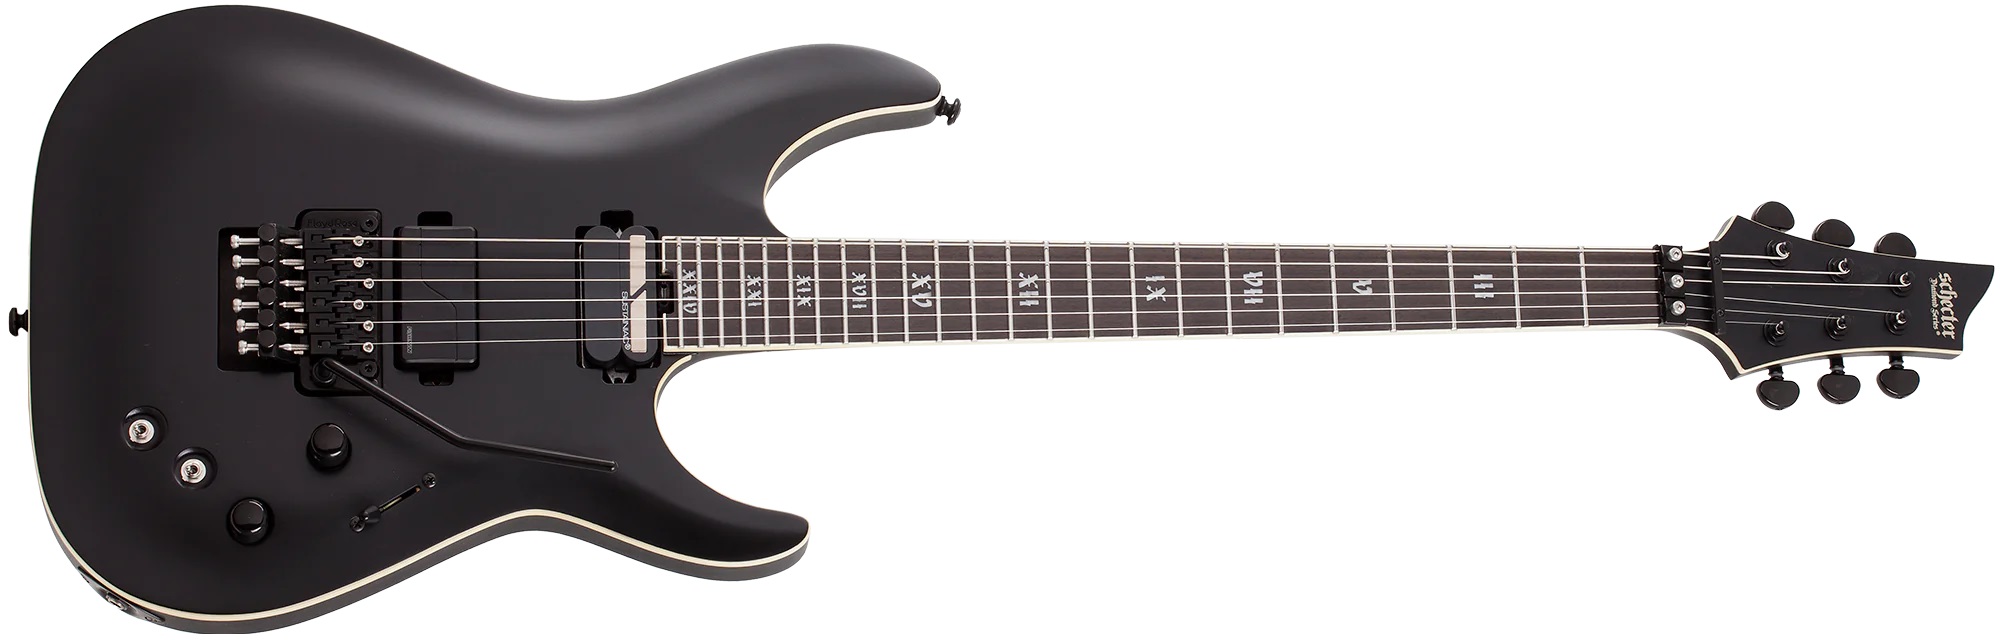 Schecter C-1 SLS Evil Twin Electric Guitar on a white background